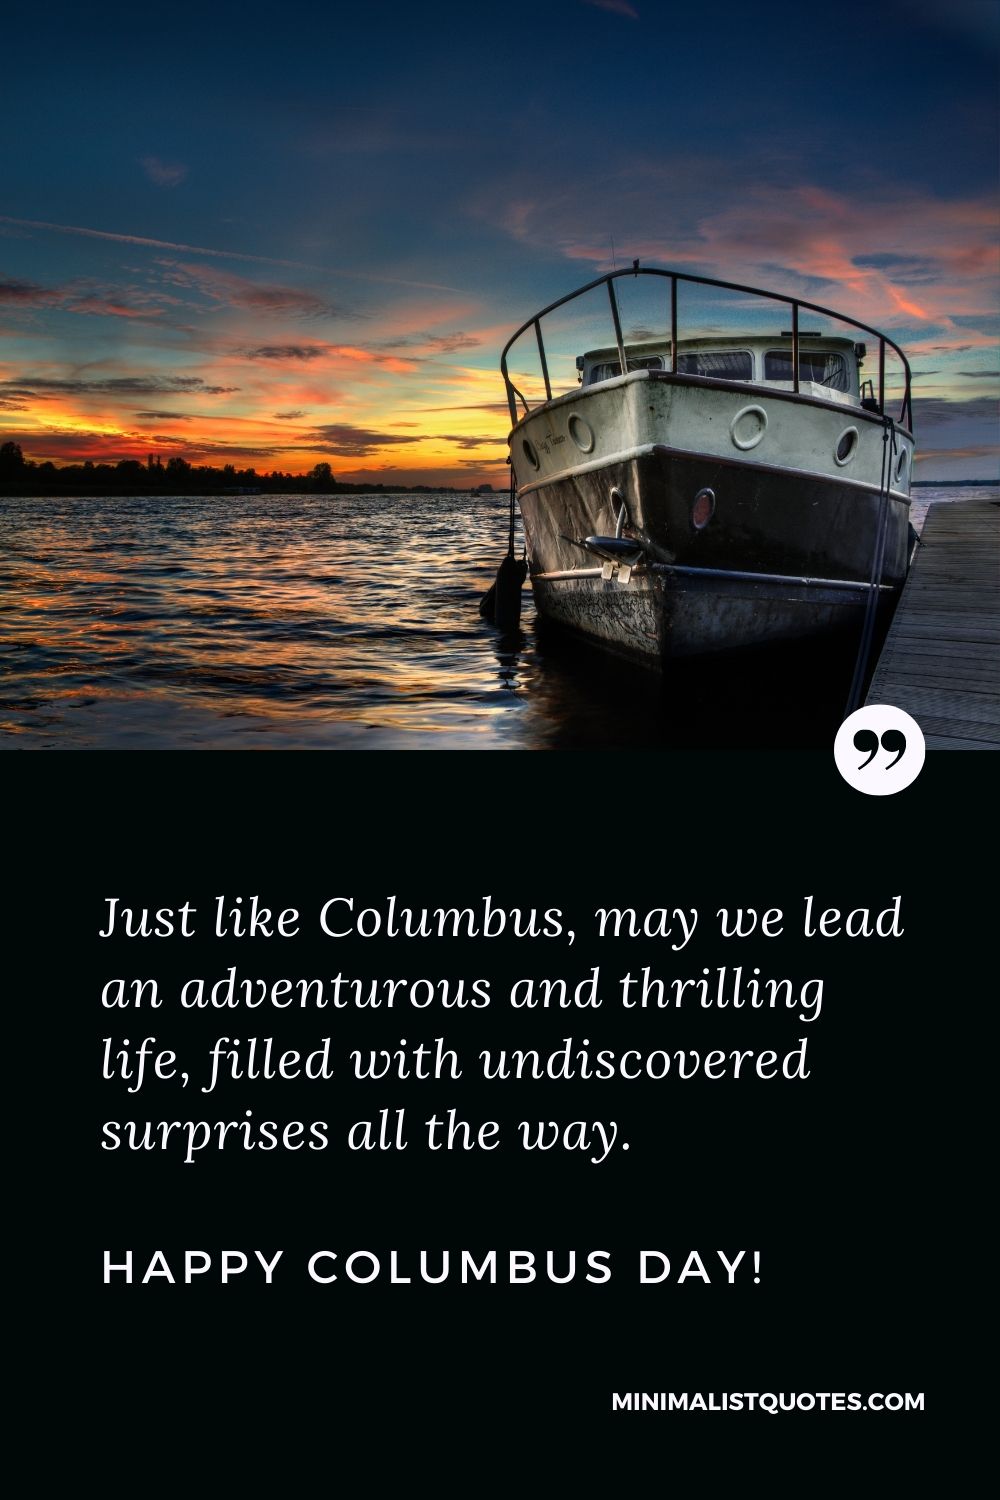 Columbus Day wish, quote & message with image: Just like Columbus, may we lead an adventurous and thrilling life, filled with undiscovered surprises all the way. Happy Columbus Day!